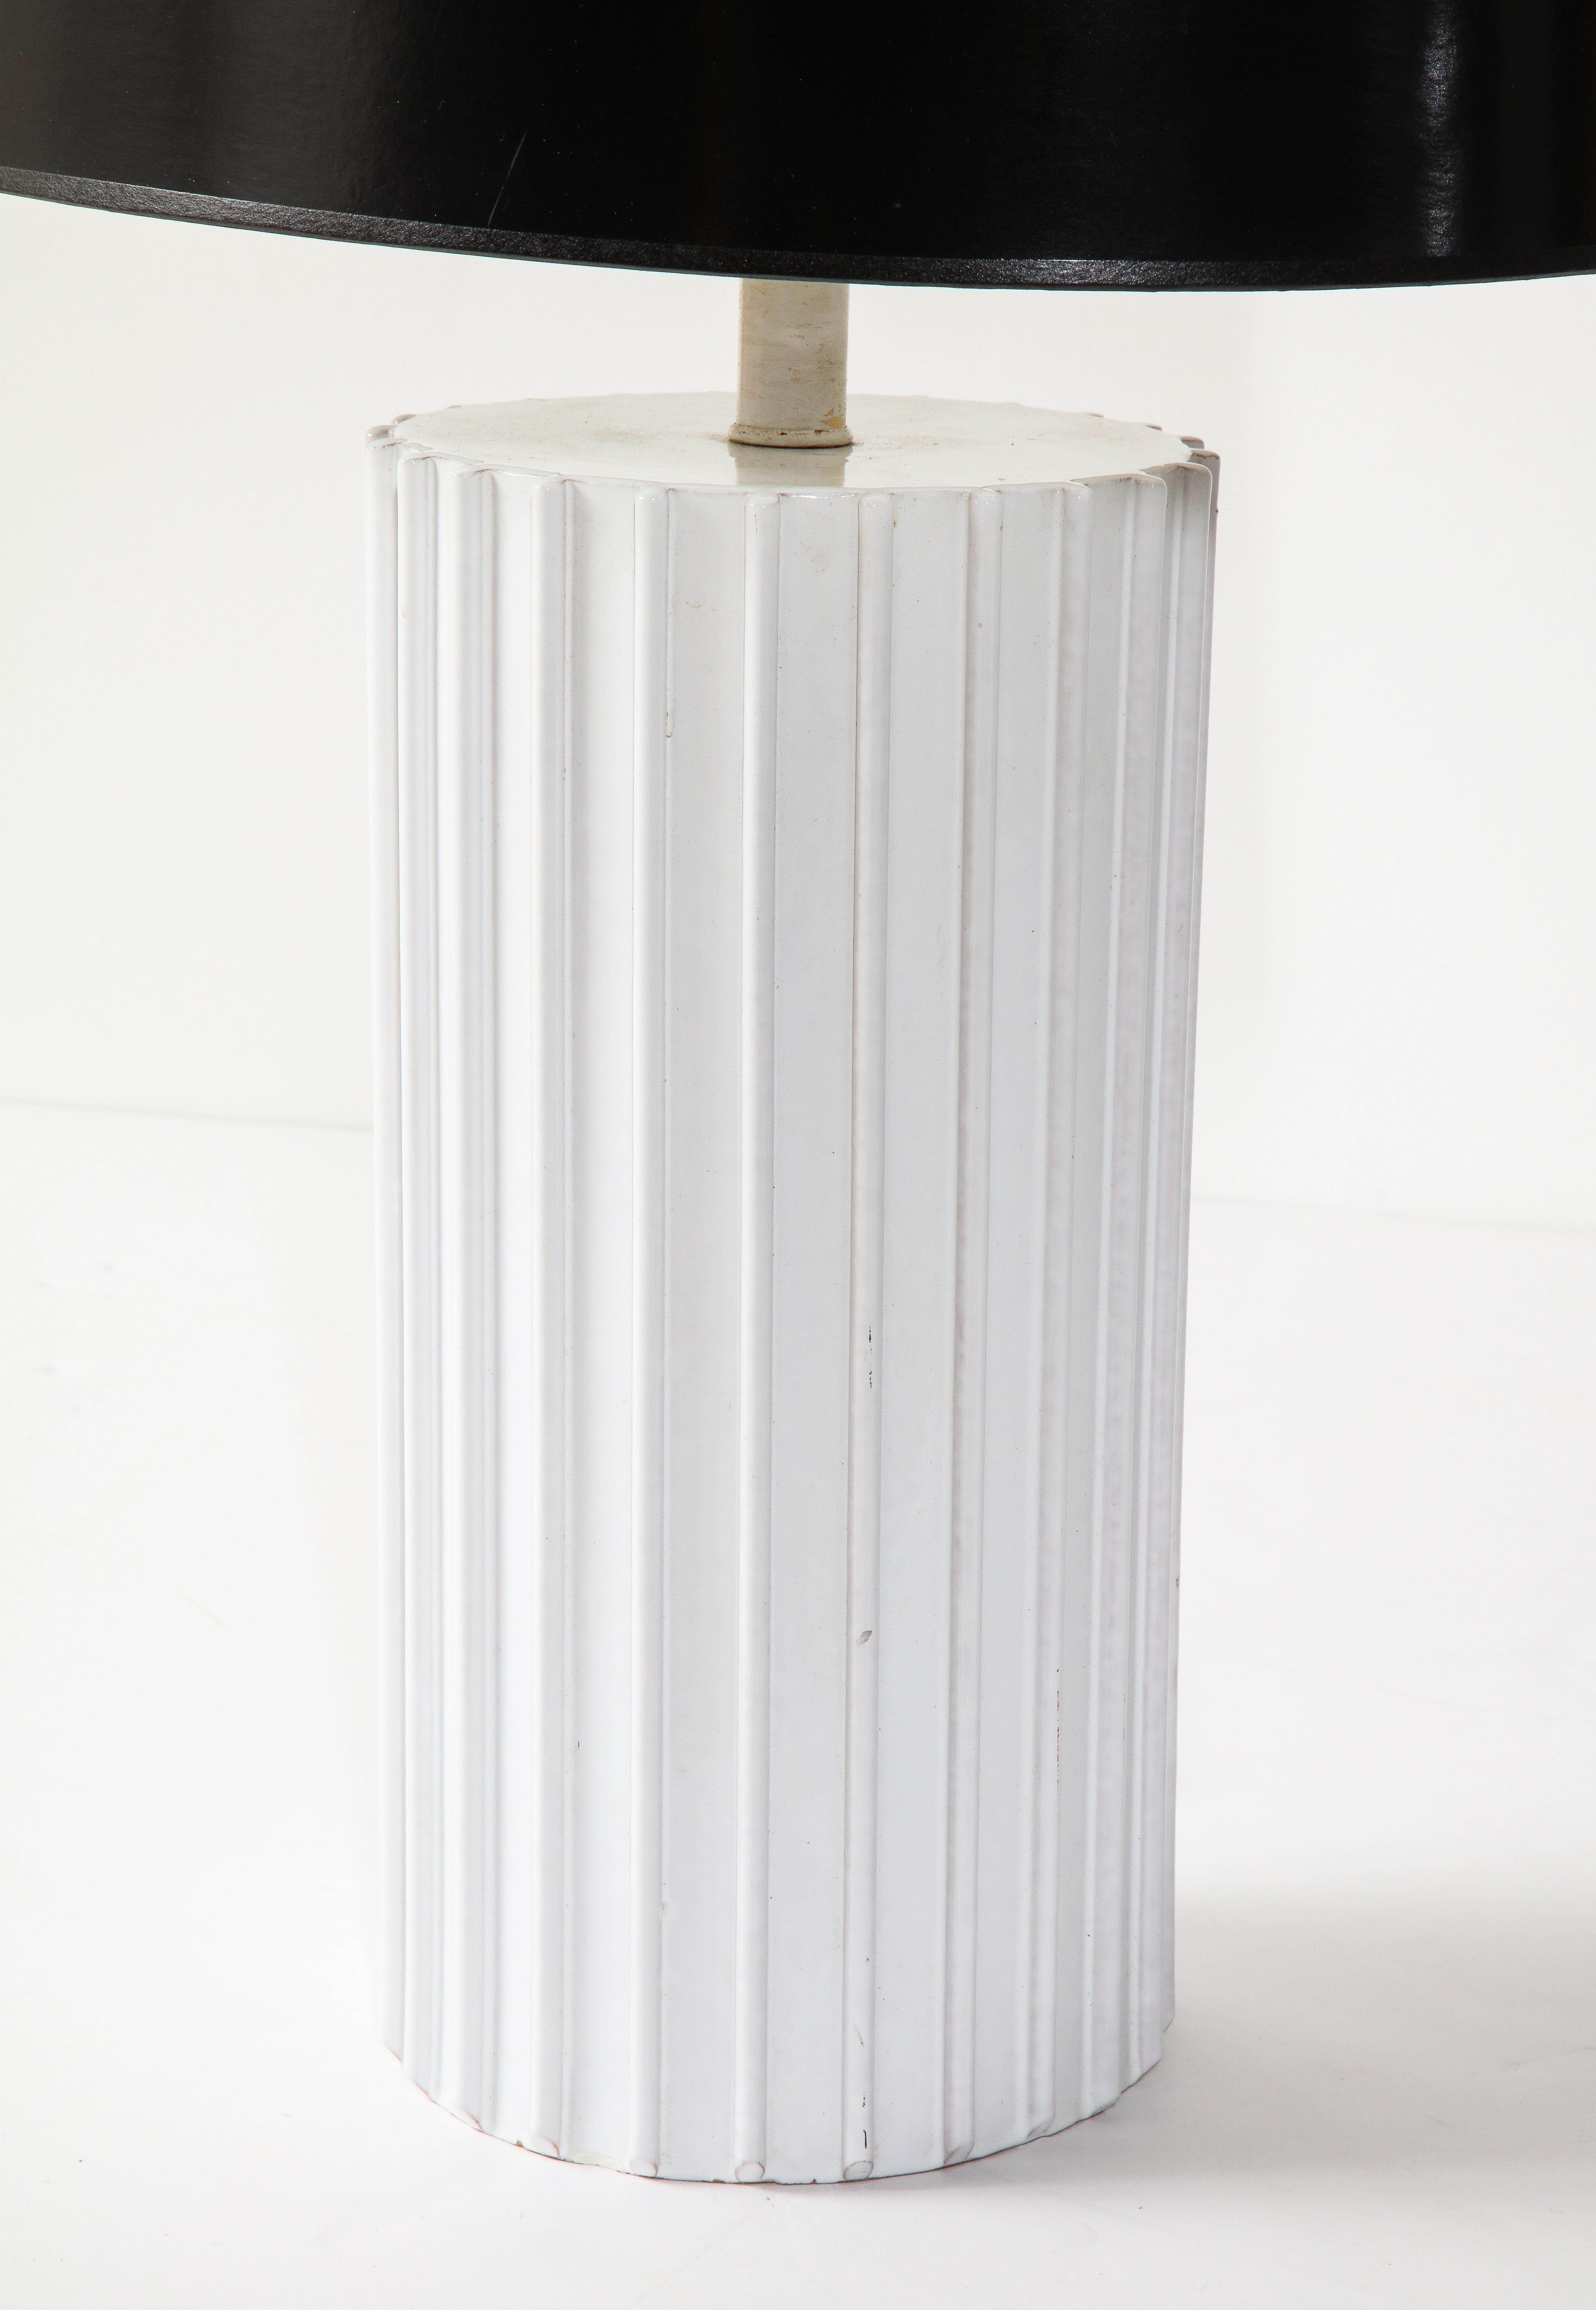 Table Lamp, Ceramic, White, Midcentury, Tall White Ceramic Lamp, C 1960 In Good Condition For Sale In New York, NY